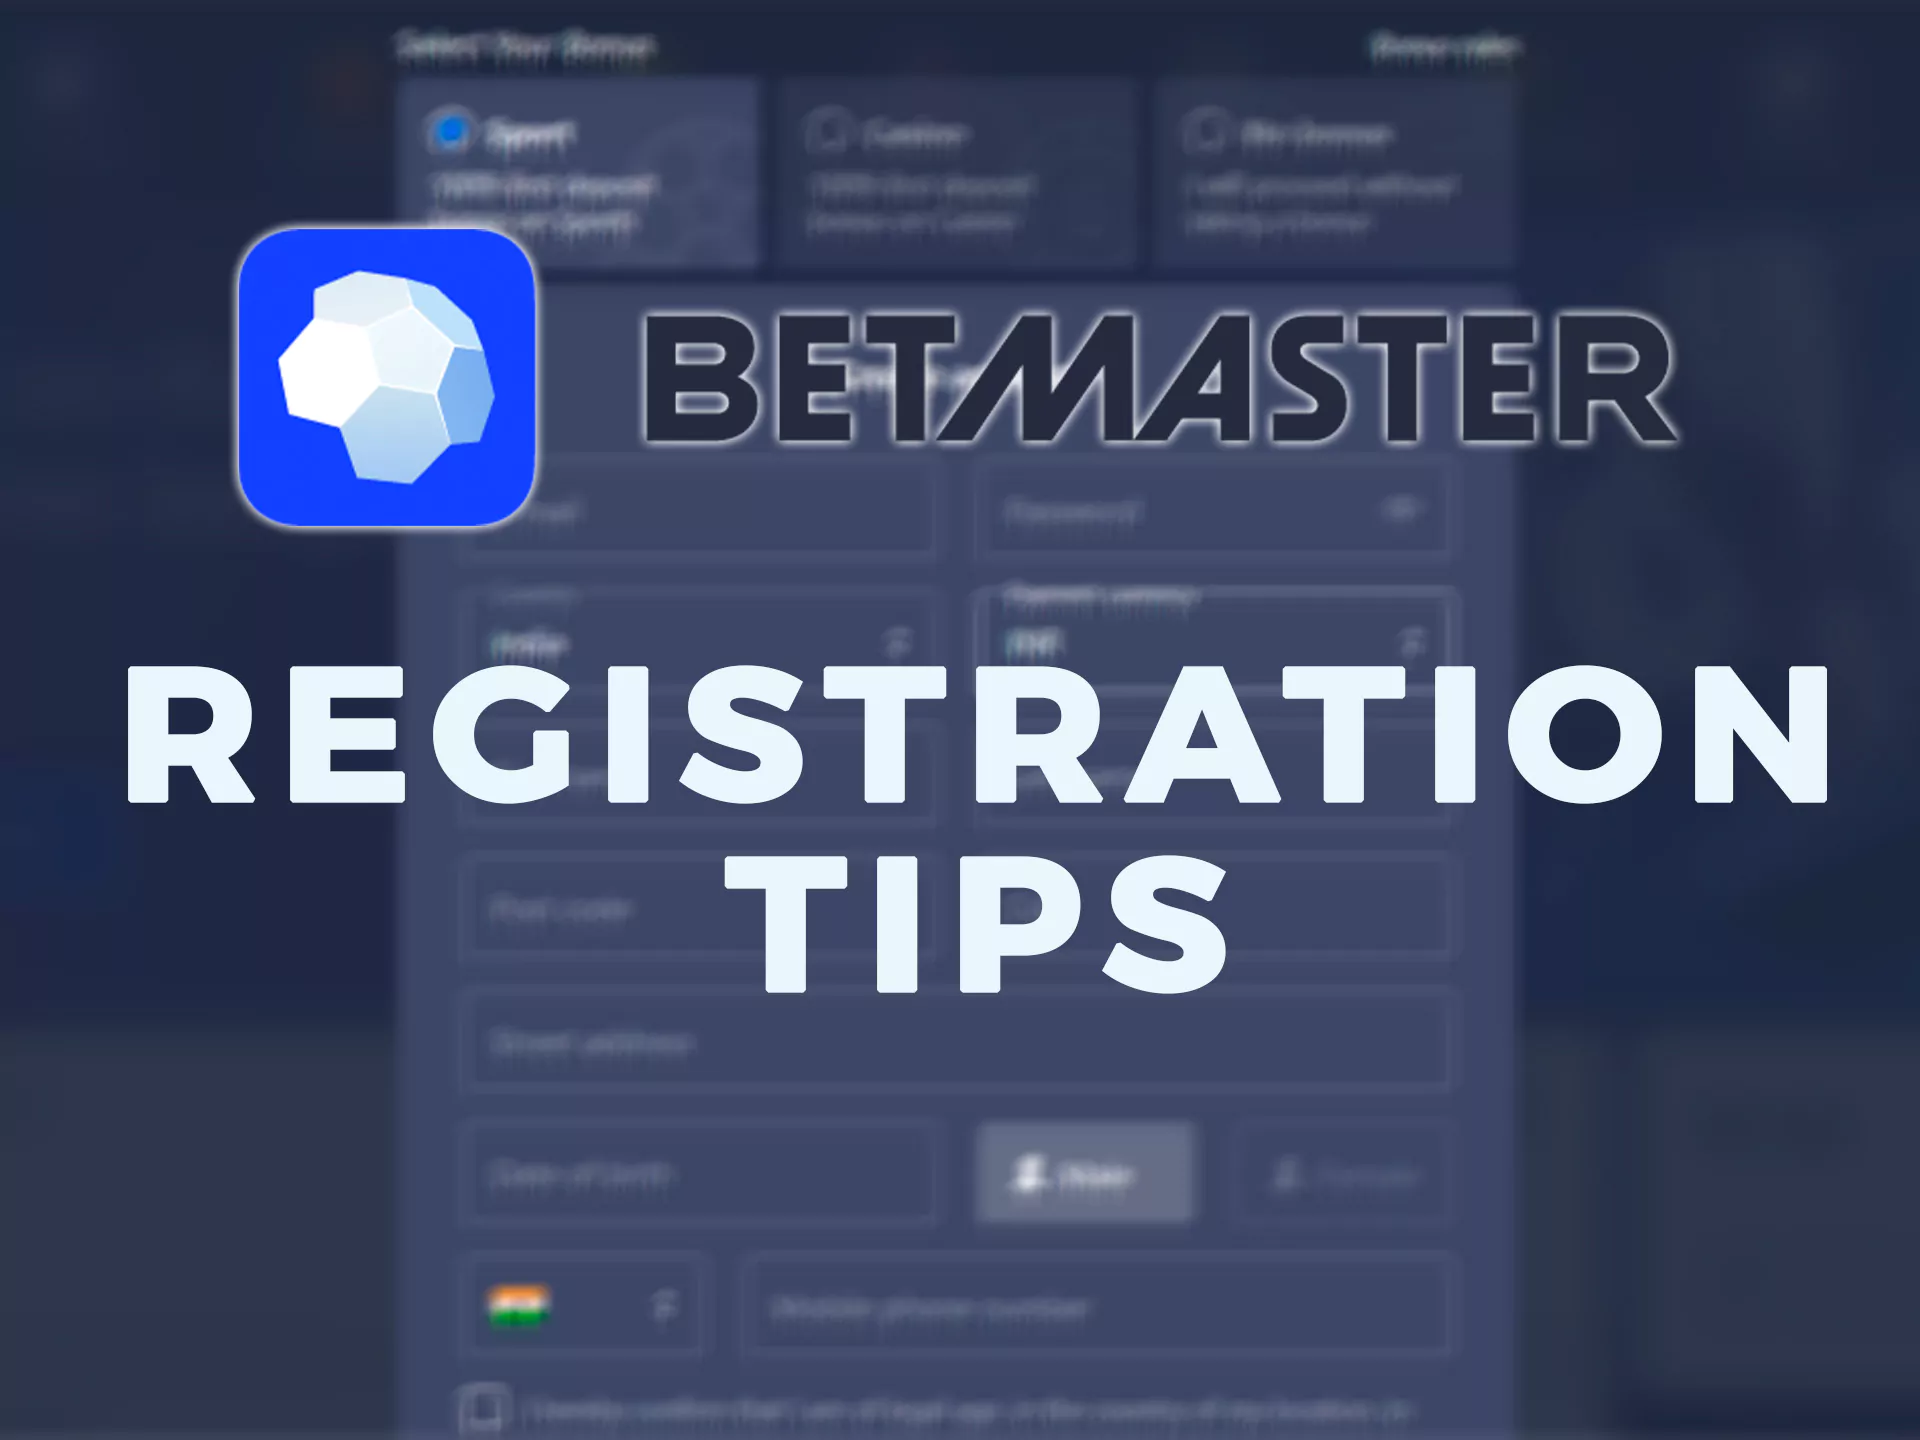 Follow these rules and you will have no problems with Betmaster account.